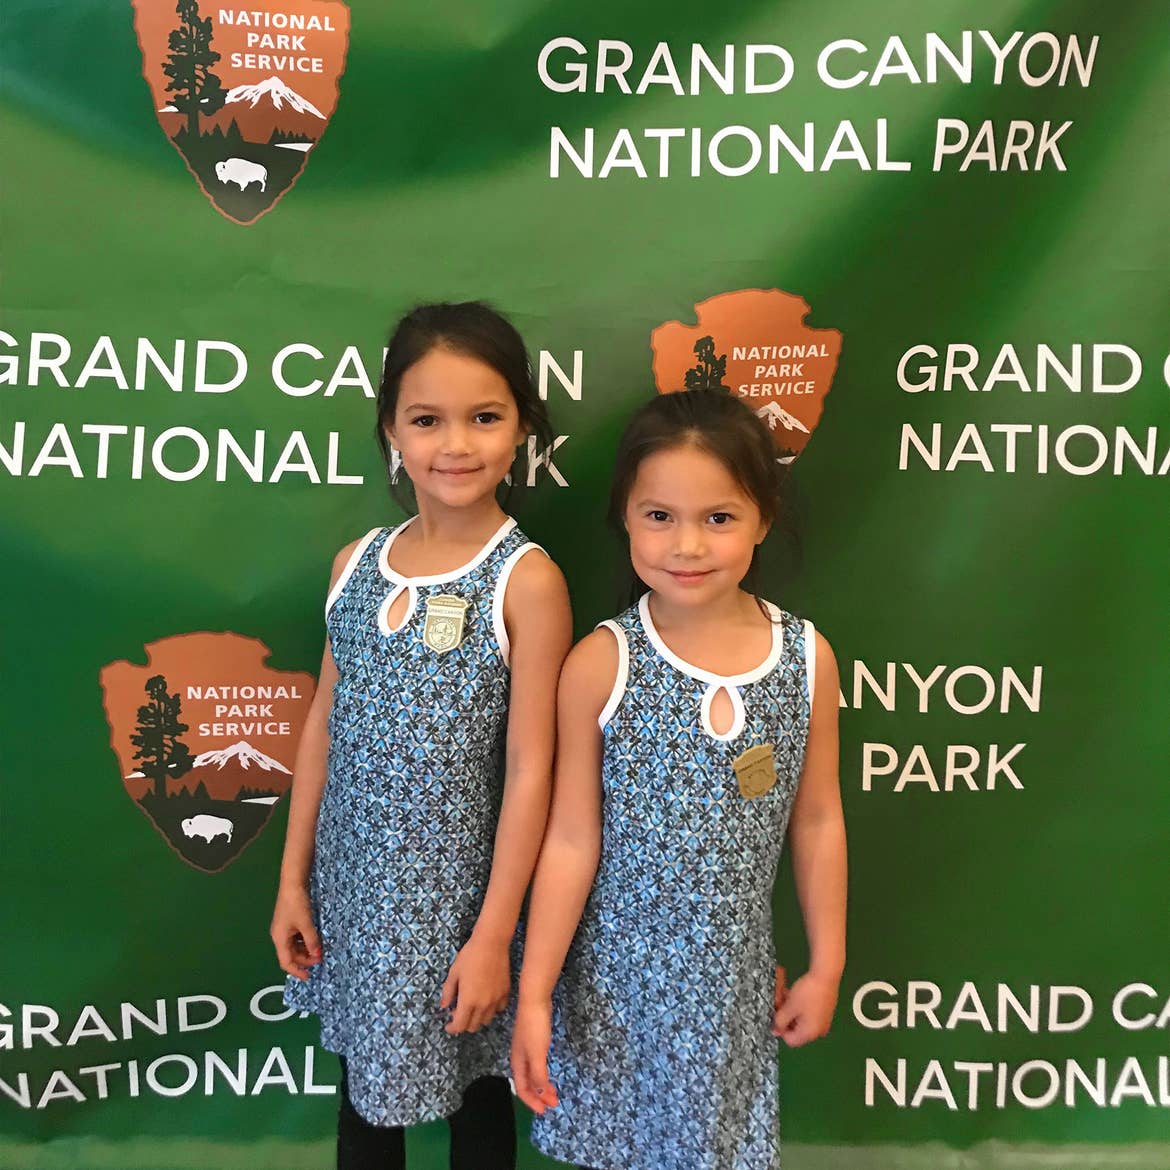 Two young girls in matching blue and white dresses wear two Junior Park Ranger badges in front of a green backdrop reading, 'Grand Canyon National Park'.